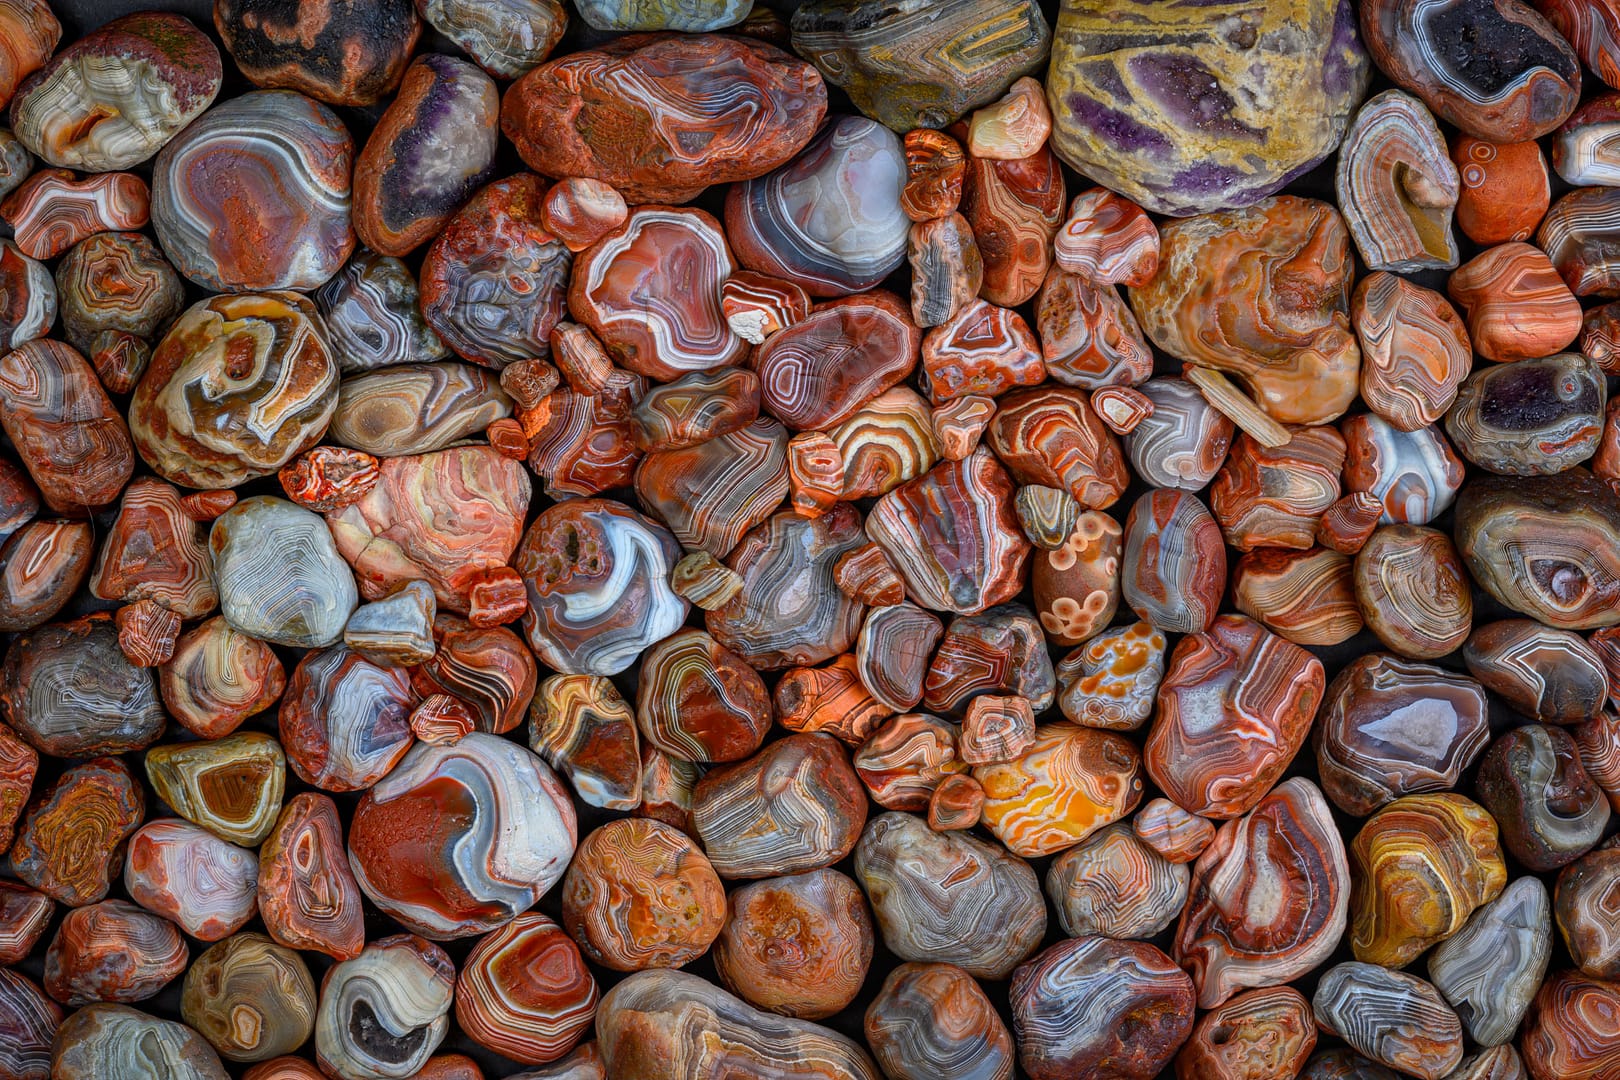 Lake-Superior-Agate-Collection-Pezios-Photography